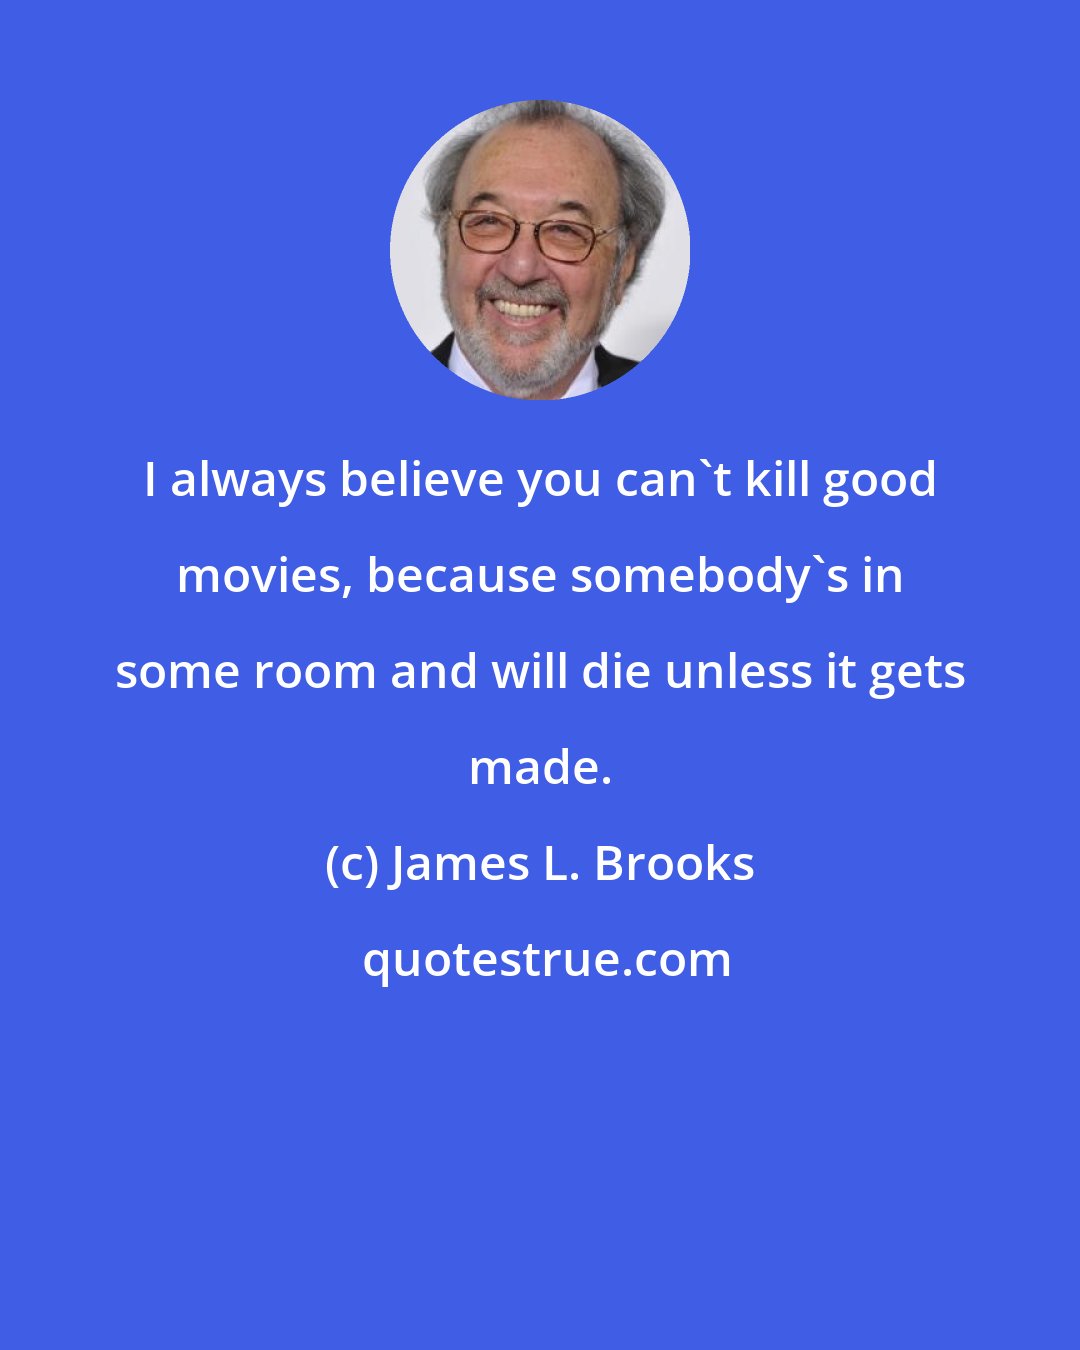 James L. Brooks: I always believe you can't kill good movies, because somebody's in some room and will die unless it gets made.